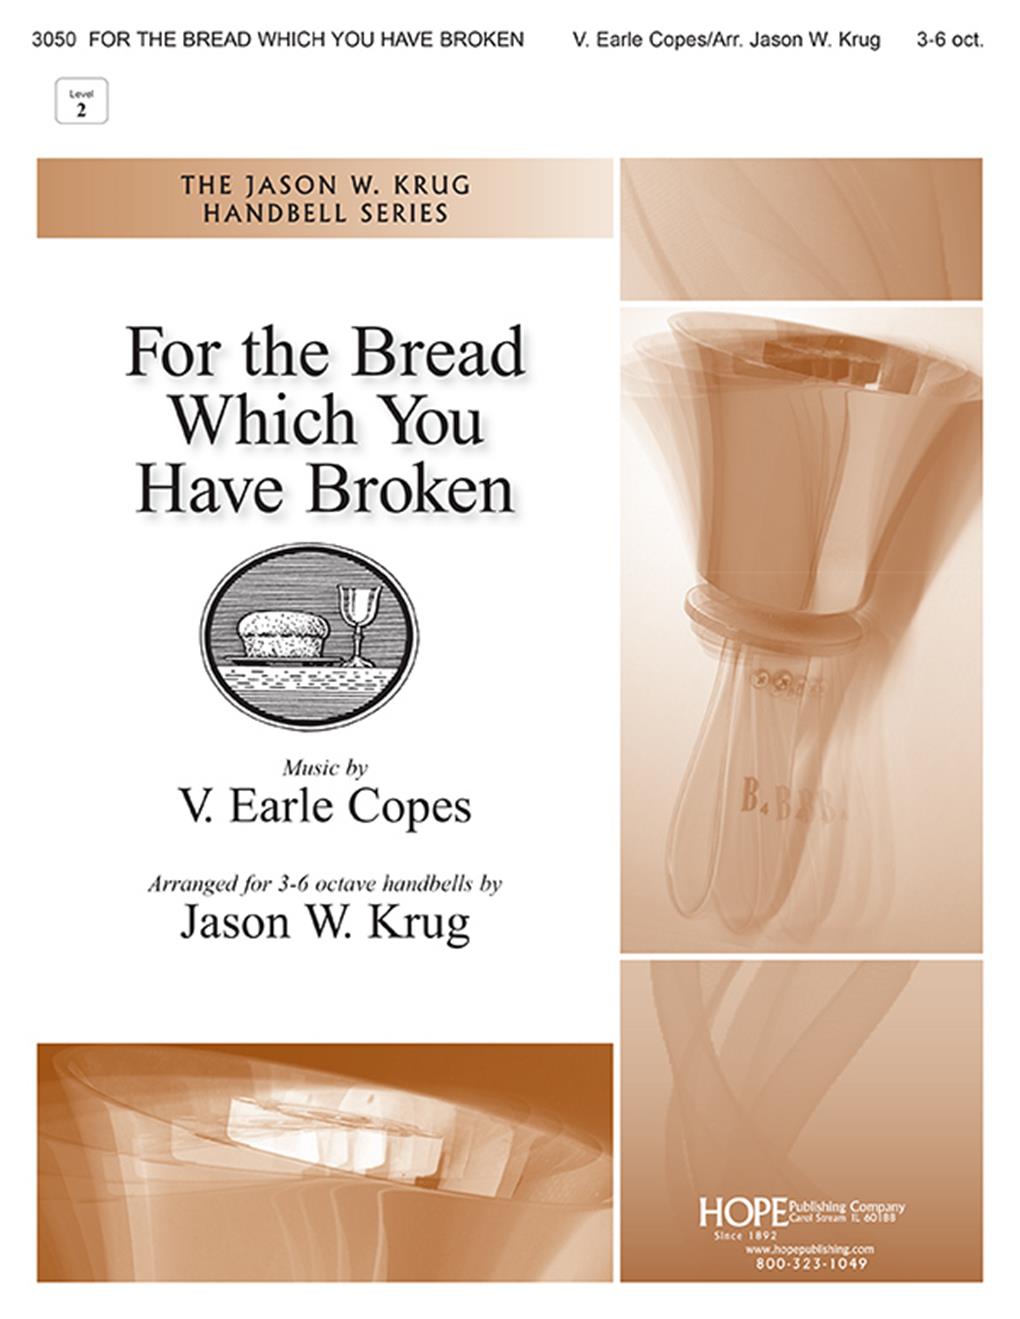 For the Bread Which You Have Broken - 3-6 Oct Cover Image